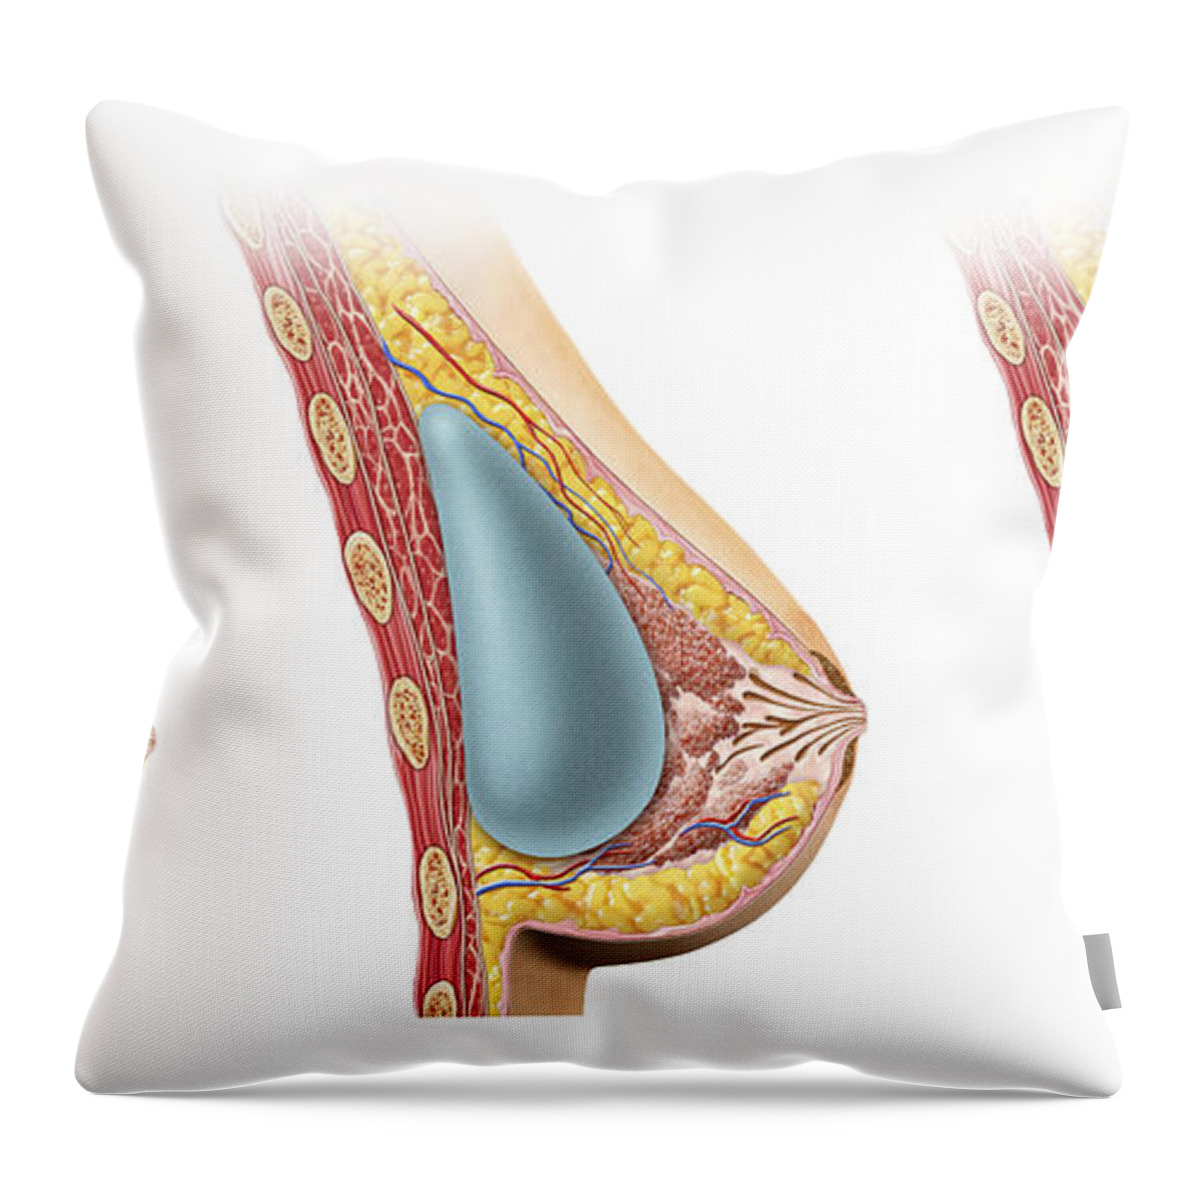 Woman Breast Implant Cross Section Throw Pillow